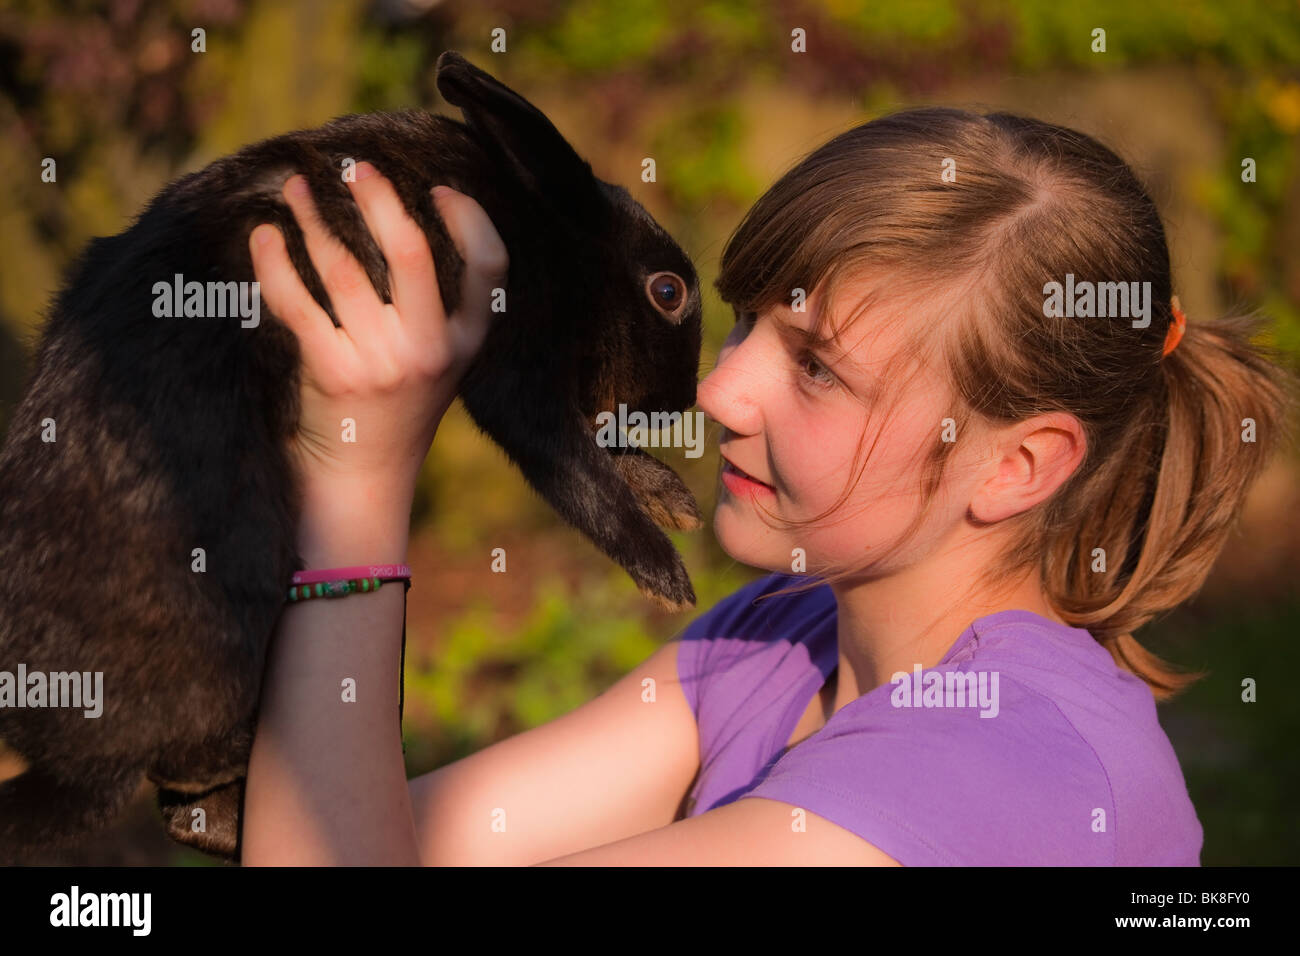 Young girl playing with a rabbit Stock Photo